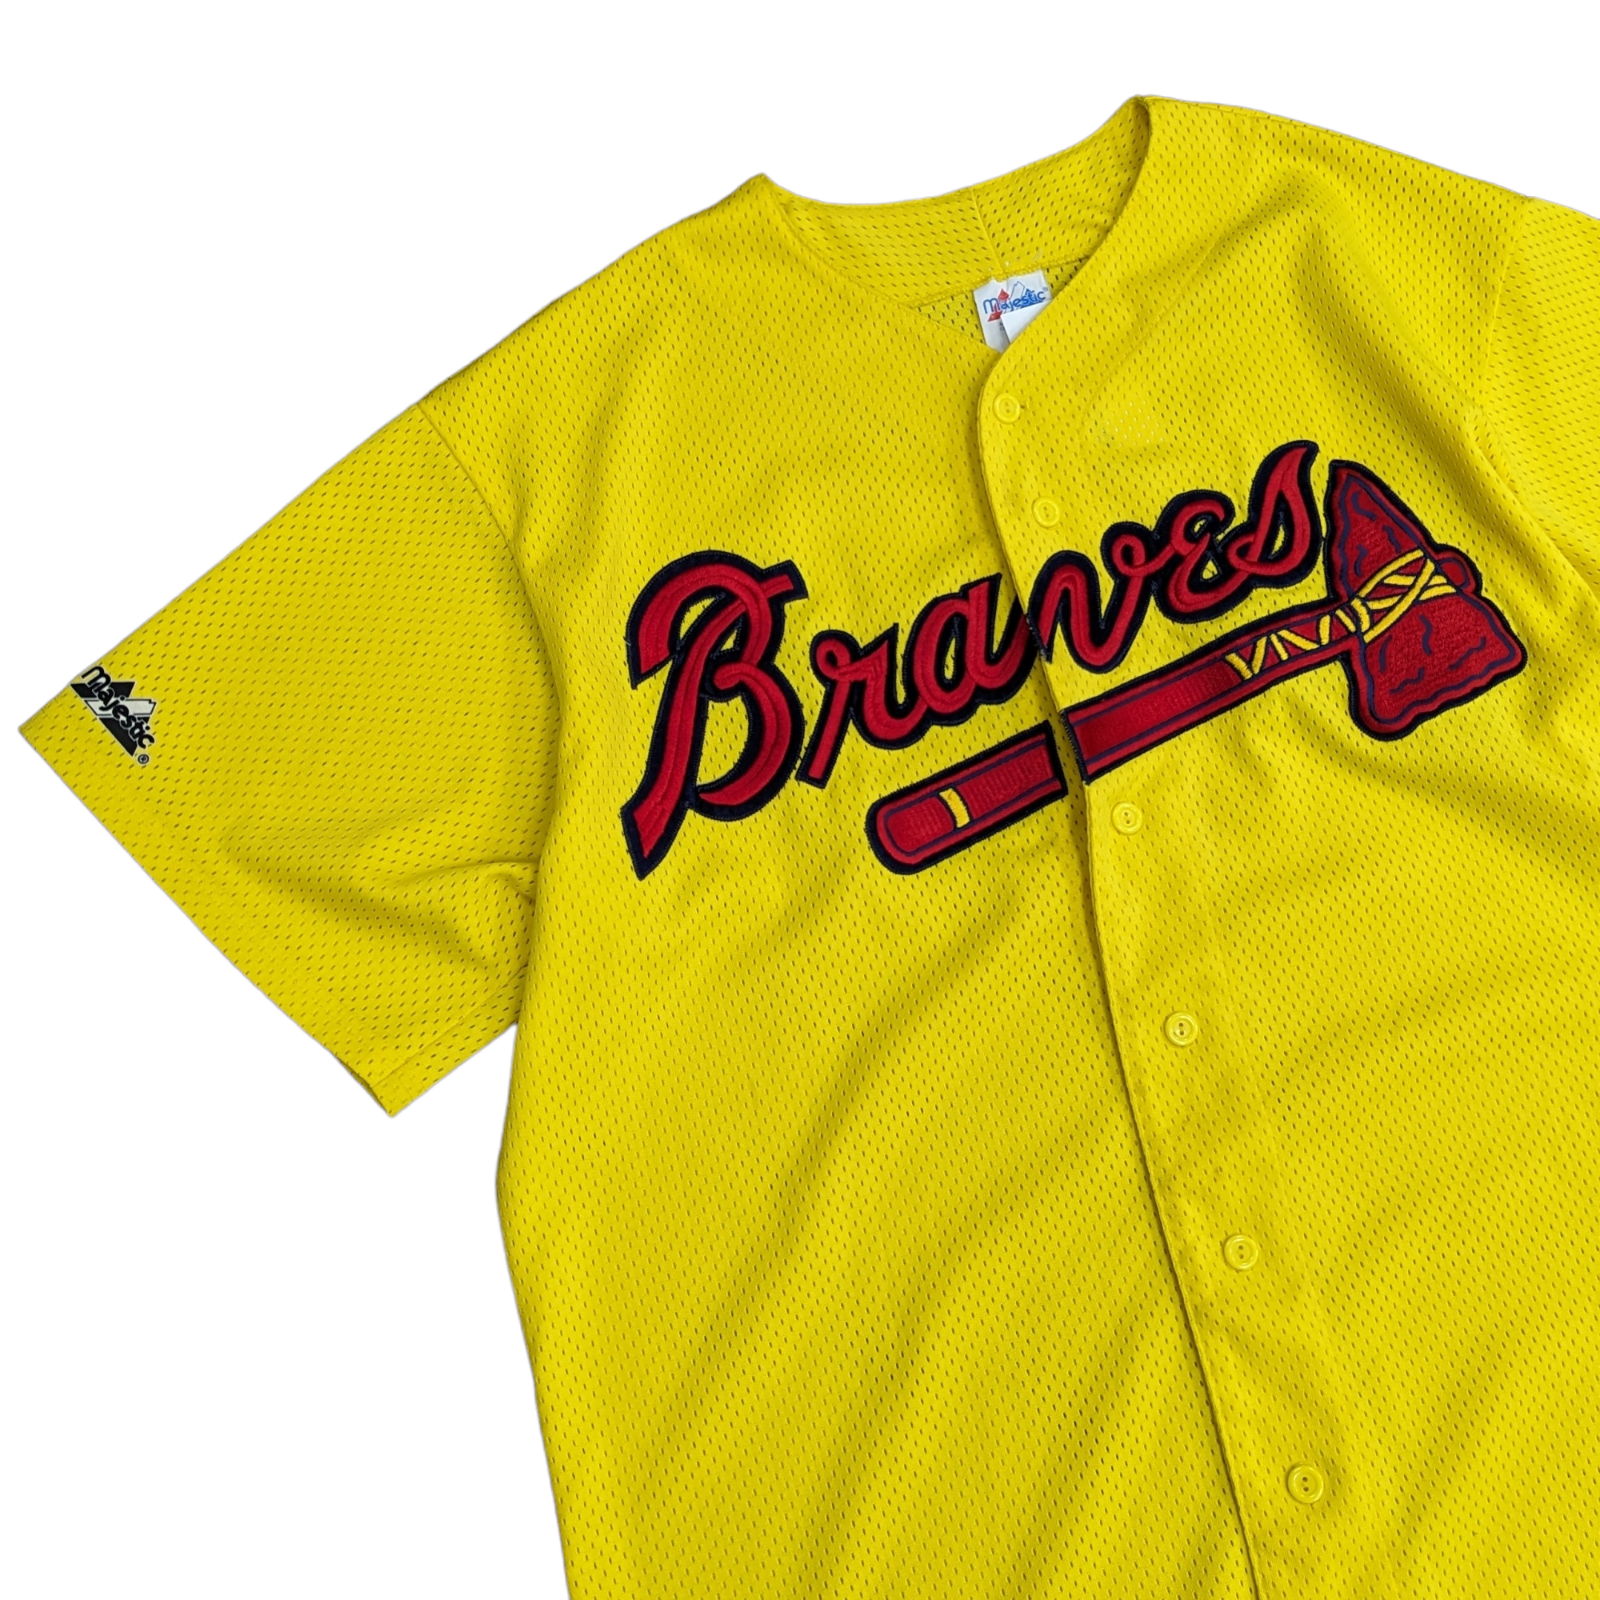 where to buy braves jerseys